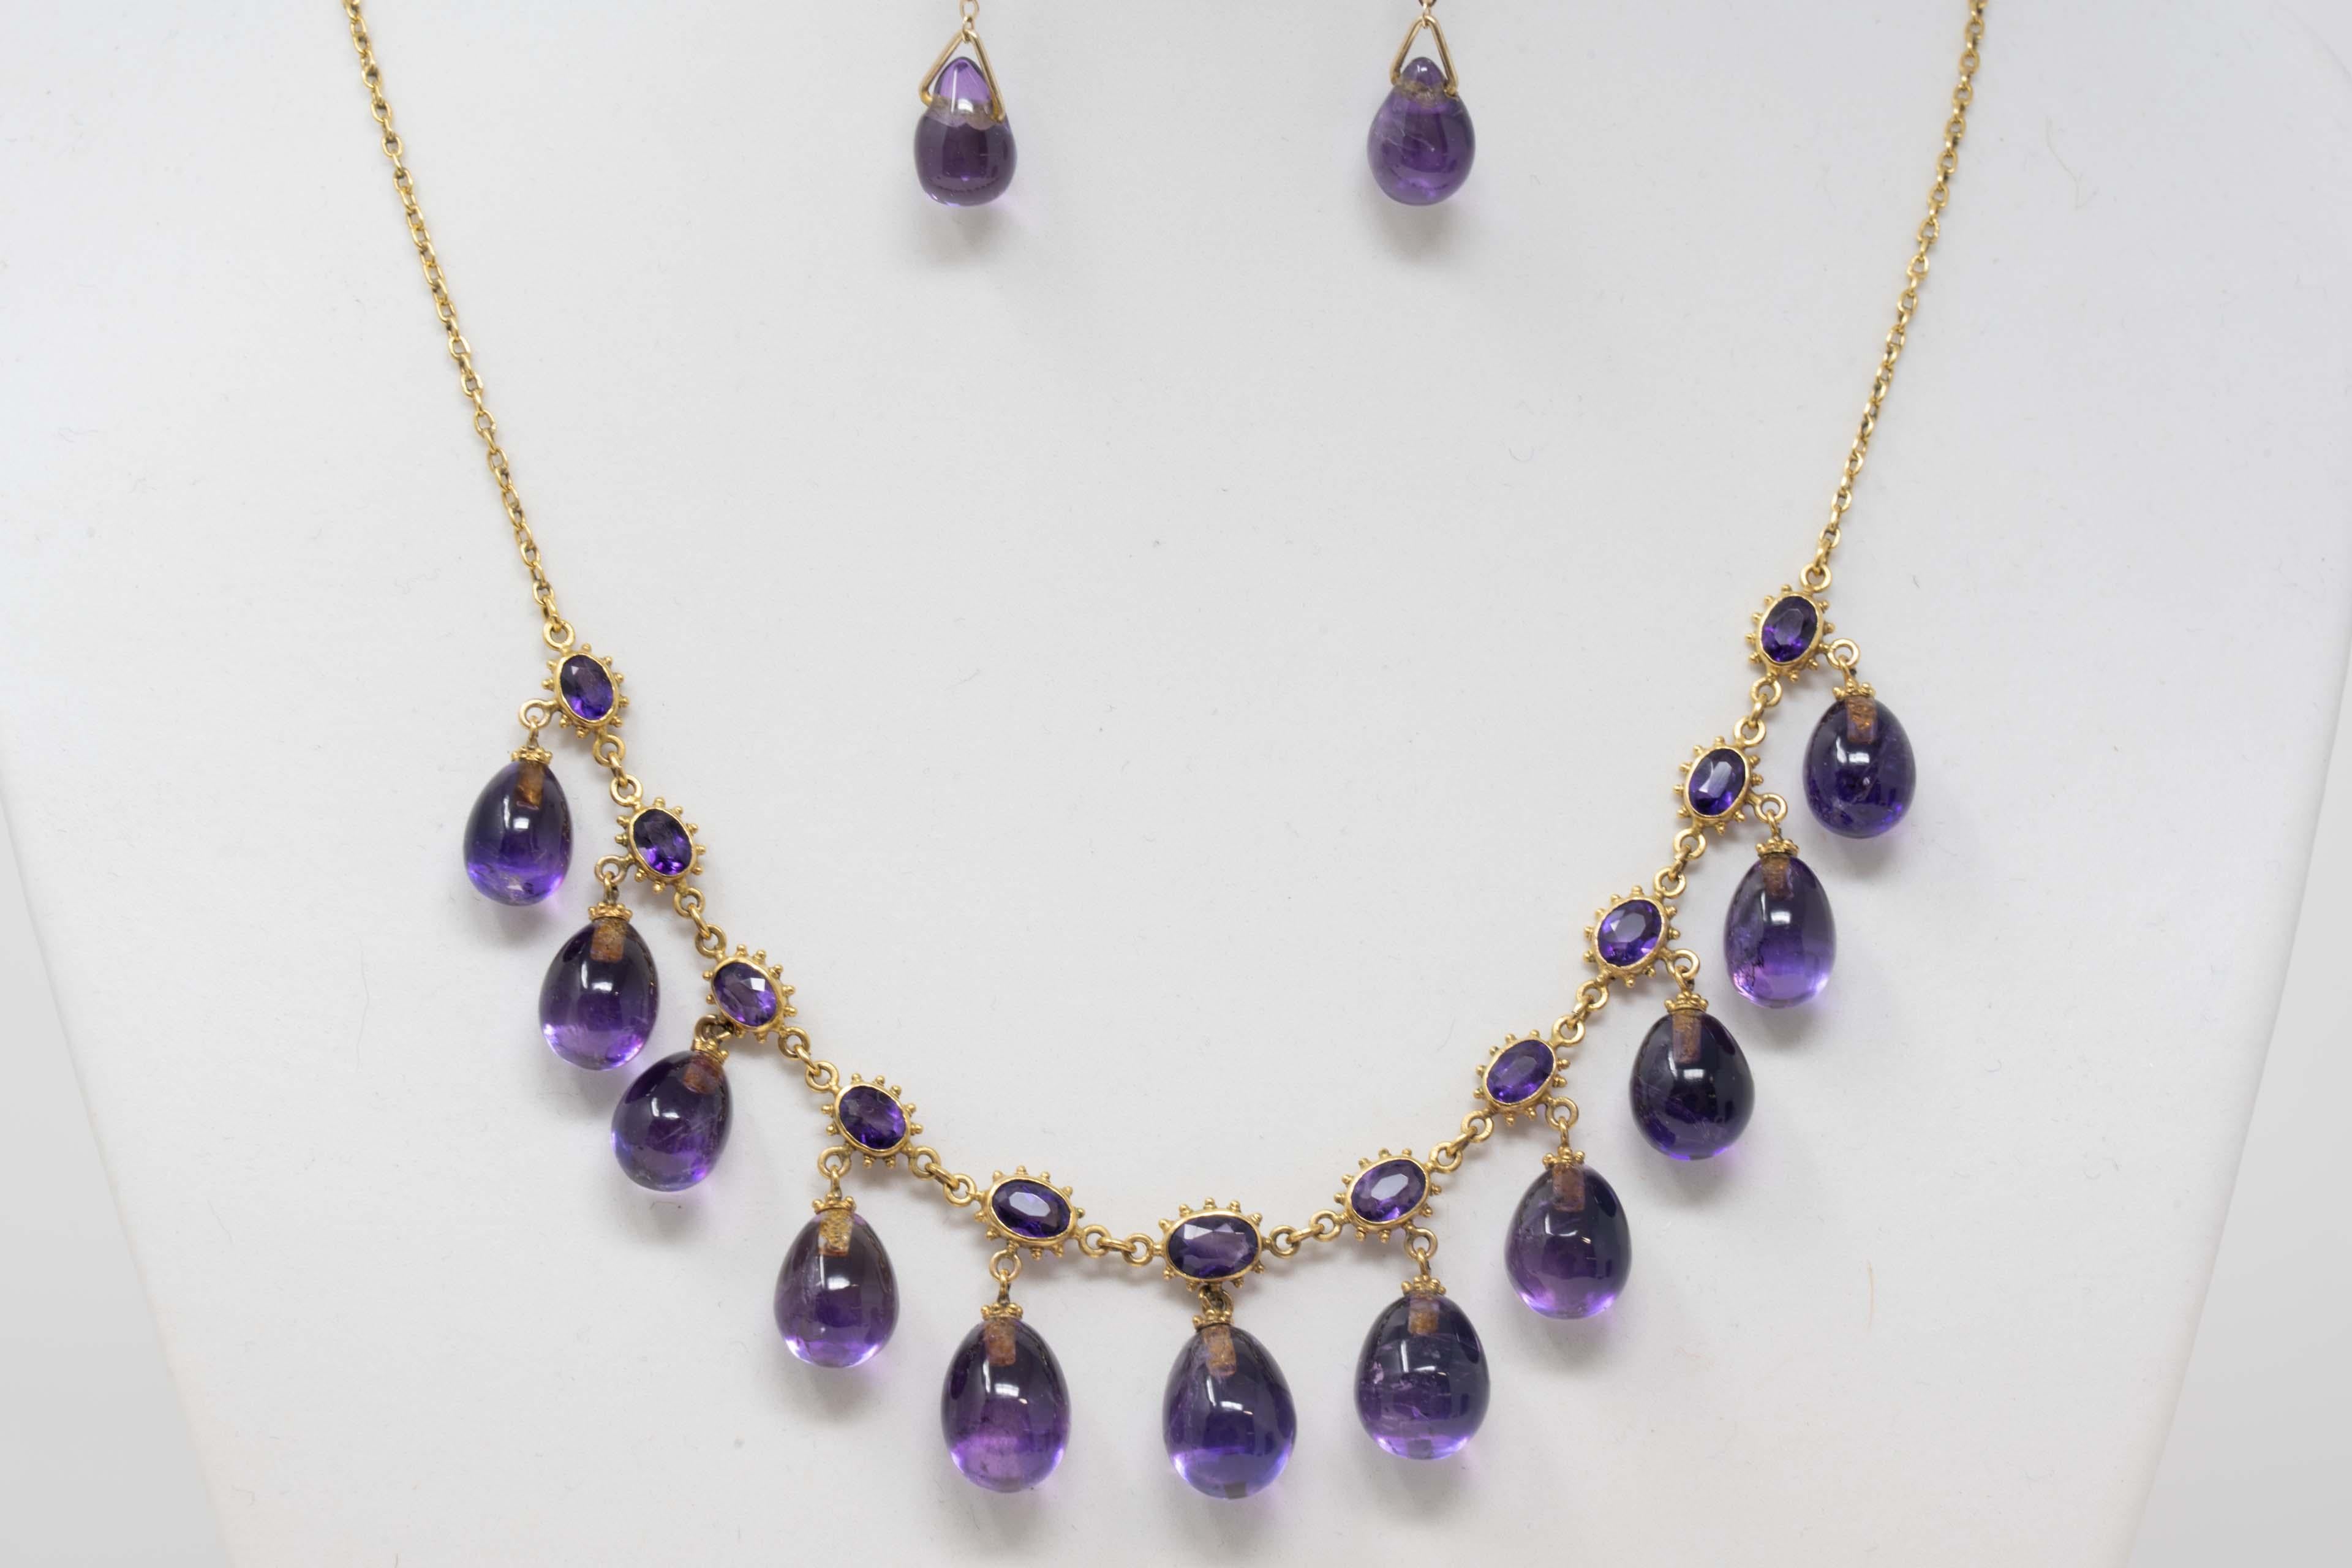 Vintage 14k yellow gold & natural amethyst stone necklace and earrings. The necklace includes 11 oval shaped amethysts measuring 5 x 3.5mm and 11 drop shaped amethysts measuring 15mm long x 10mm in diameter. Not stamped but acid tested. The earring